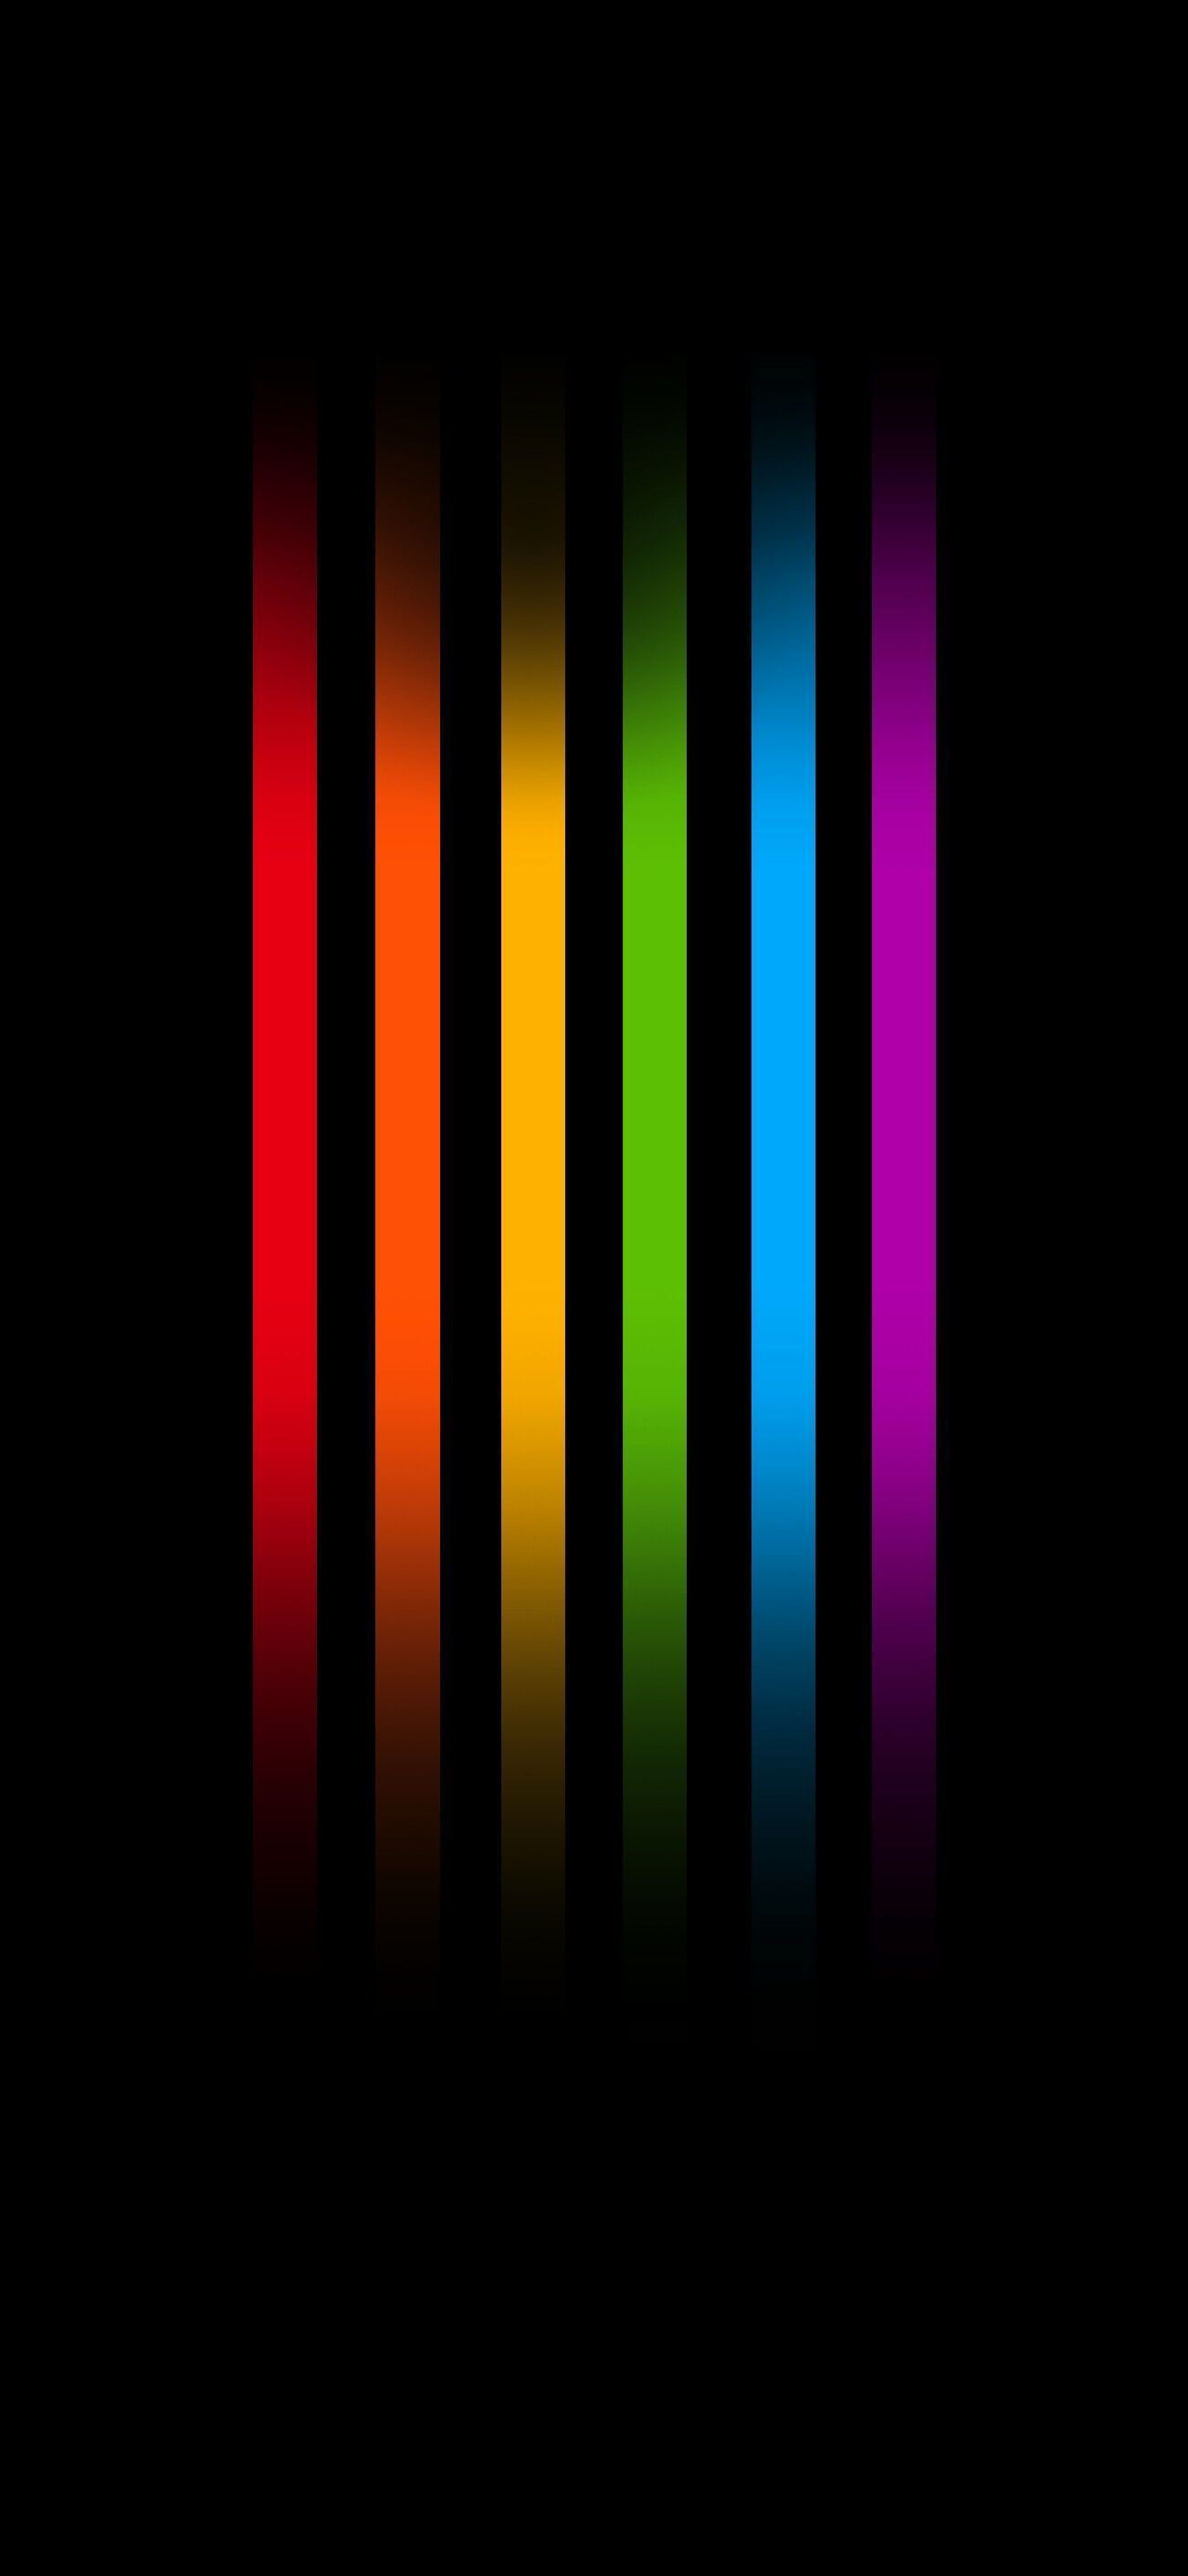 Best Colorful iPhone Wallpaper. Rainbow wallpaper iphone, Android wallpaper, Rainbow wallpaper